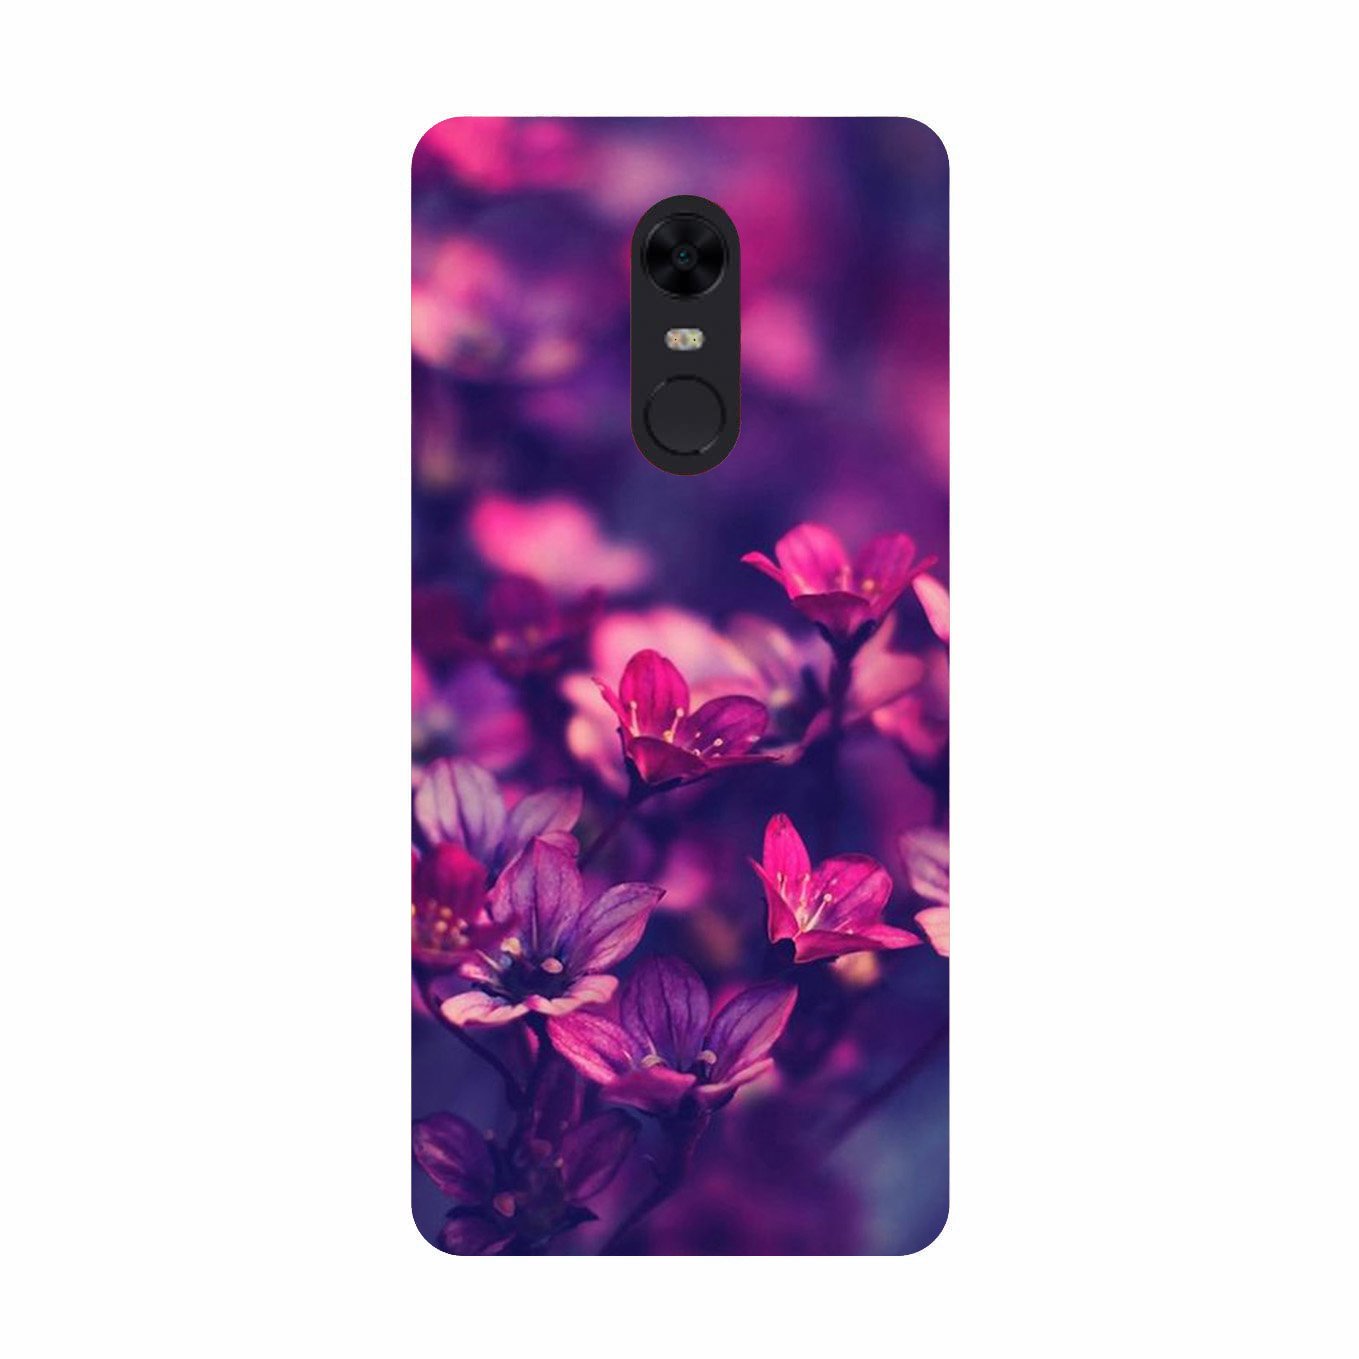 flowers Case for Redmi Note 5